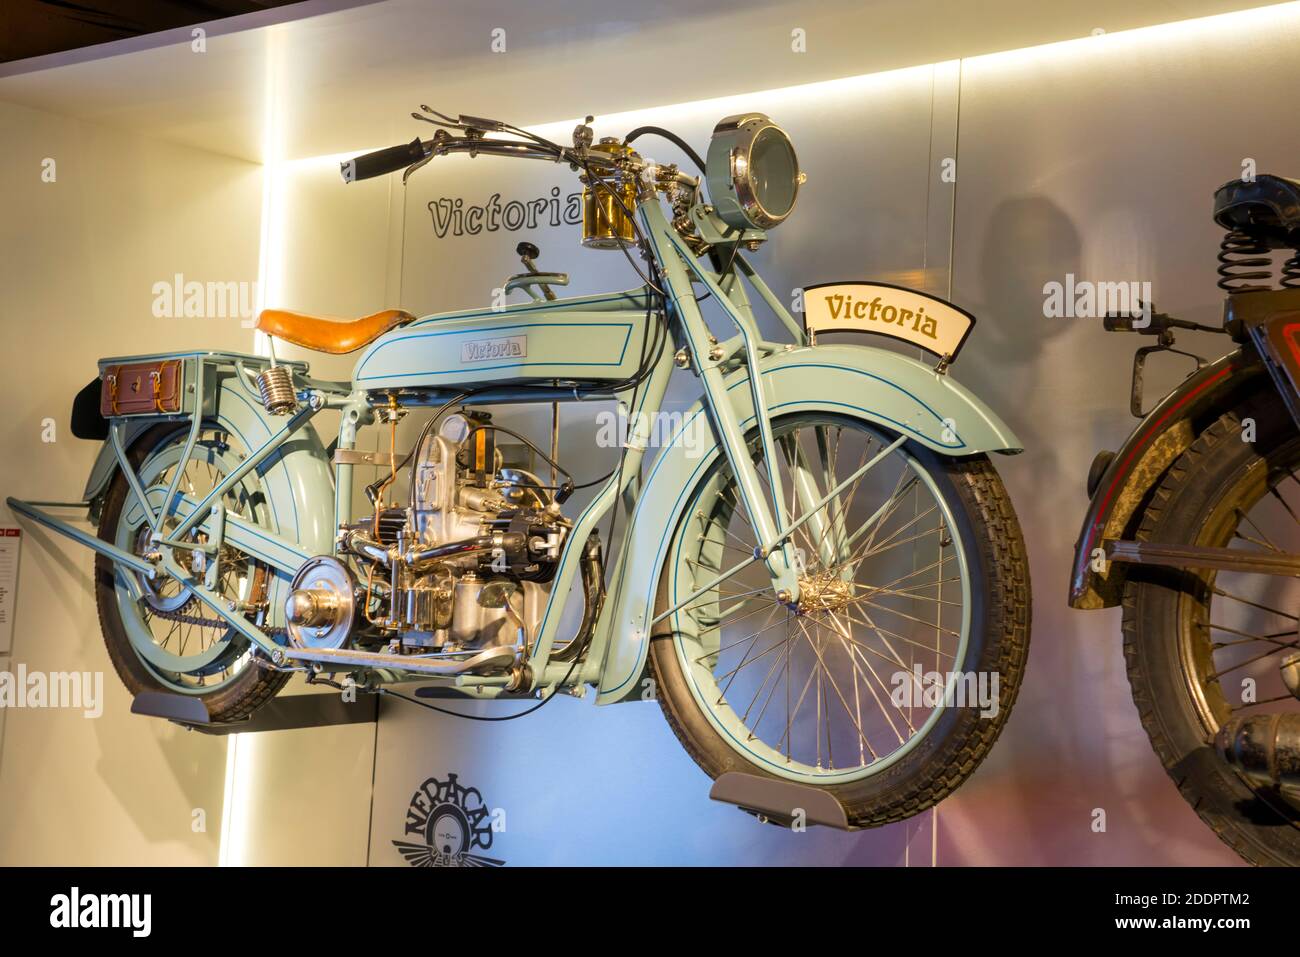 Victoria KRIII Motorcycle, Allemagne, 1921, PS.SPEICHER Museum, Einbeck, Basse-Saxe, Allemagne, Europe Banque D'Images